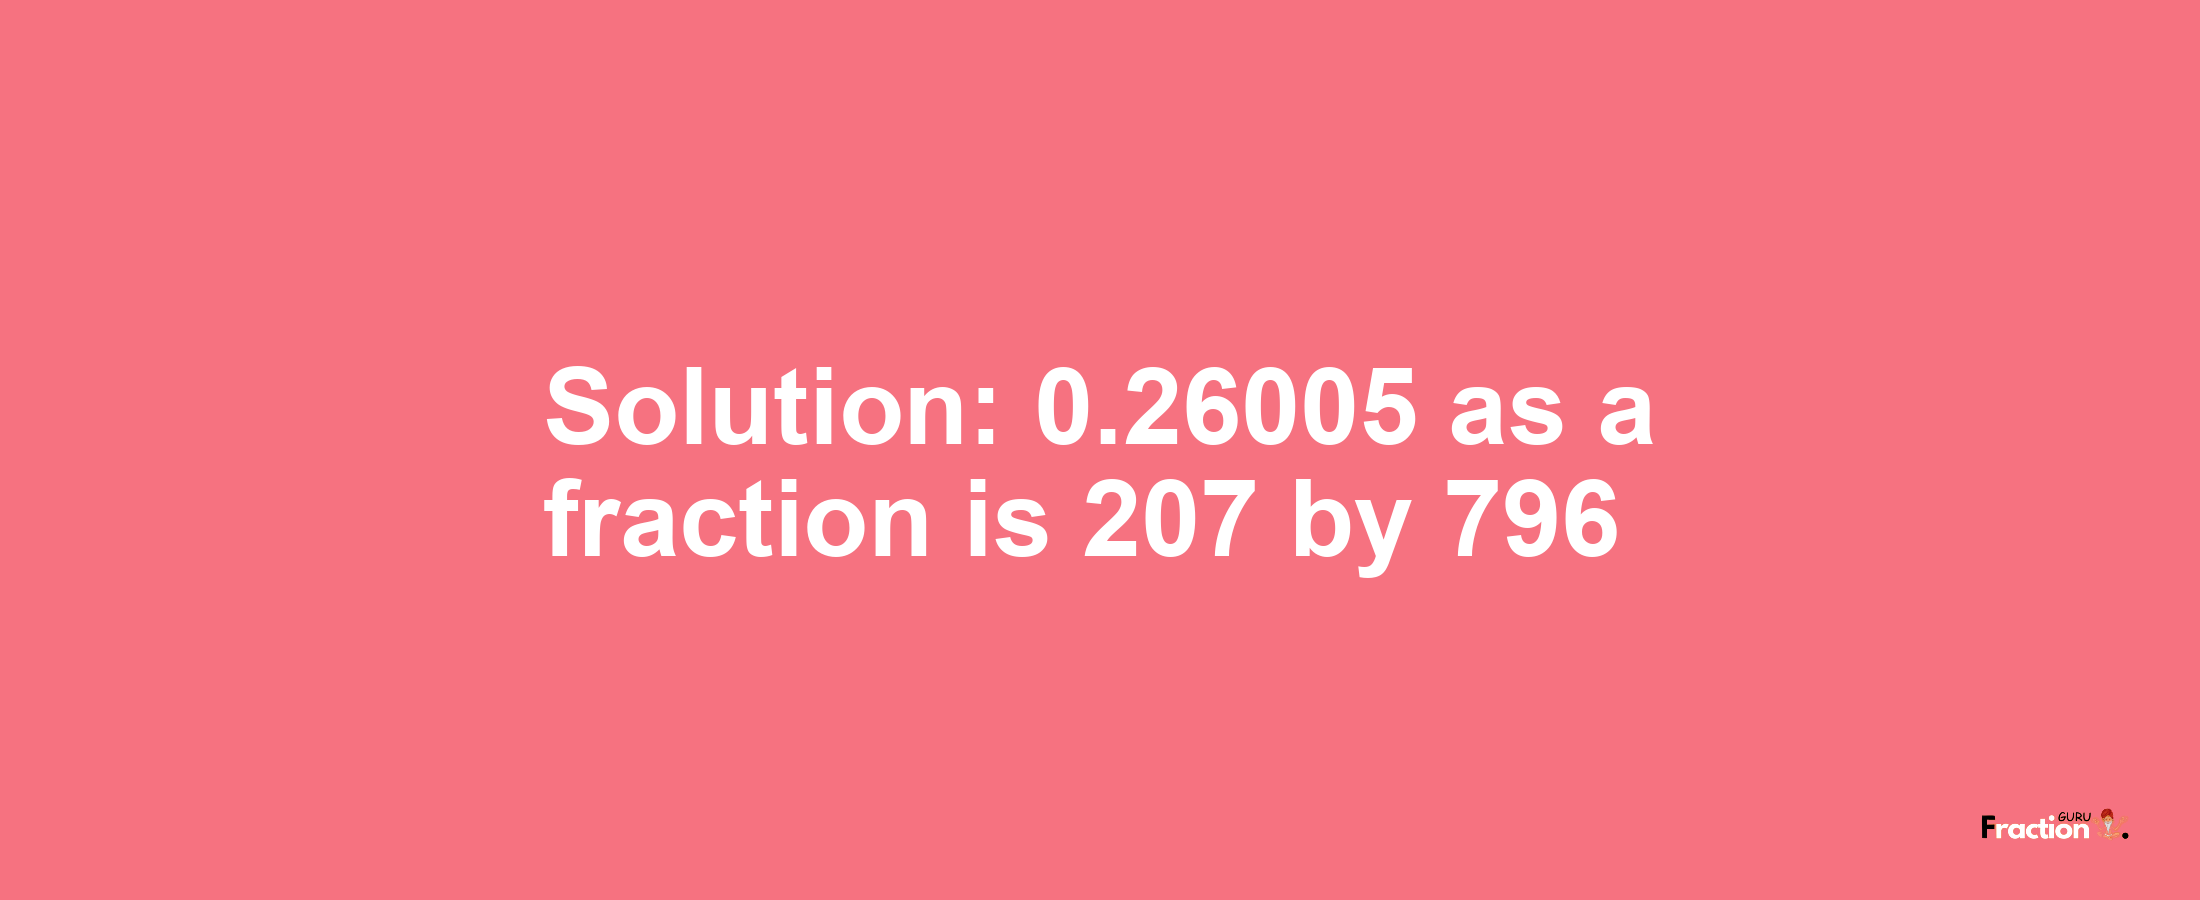 Solution:0.26005 as a fraction is 207/796